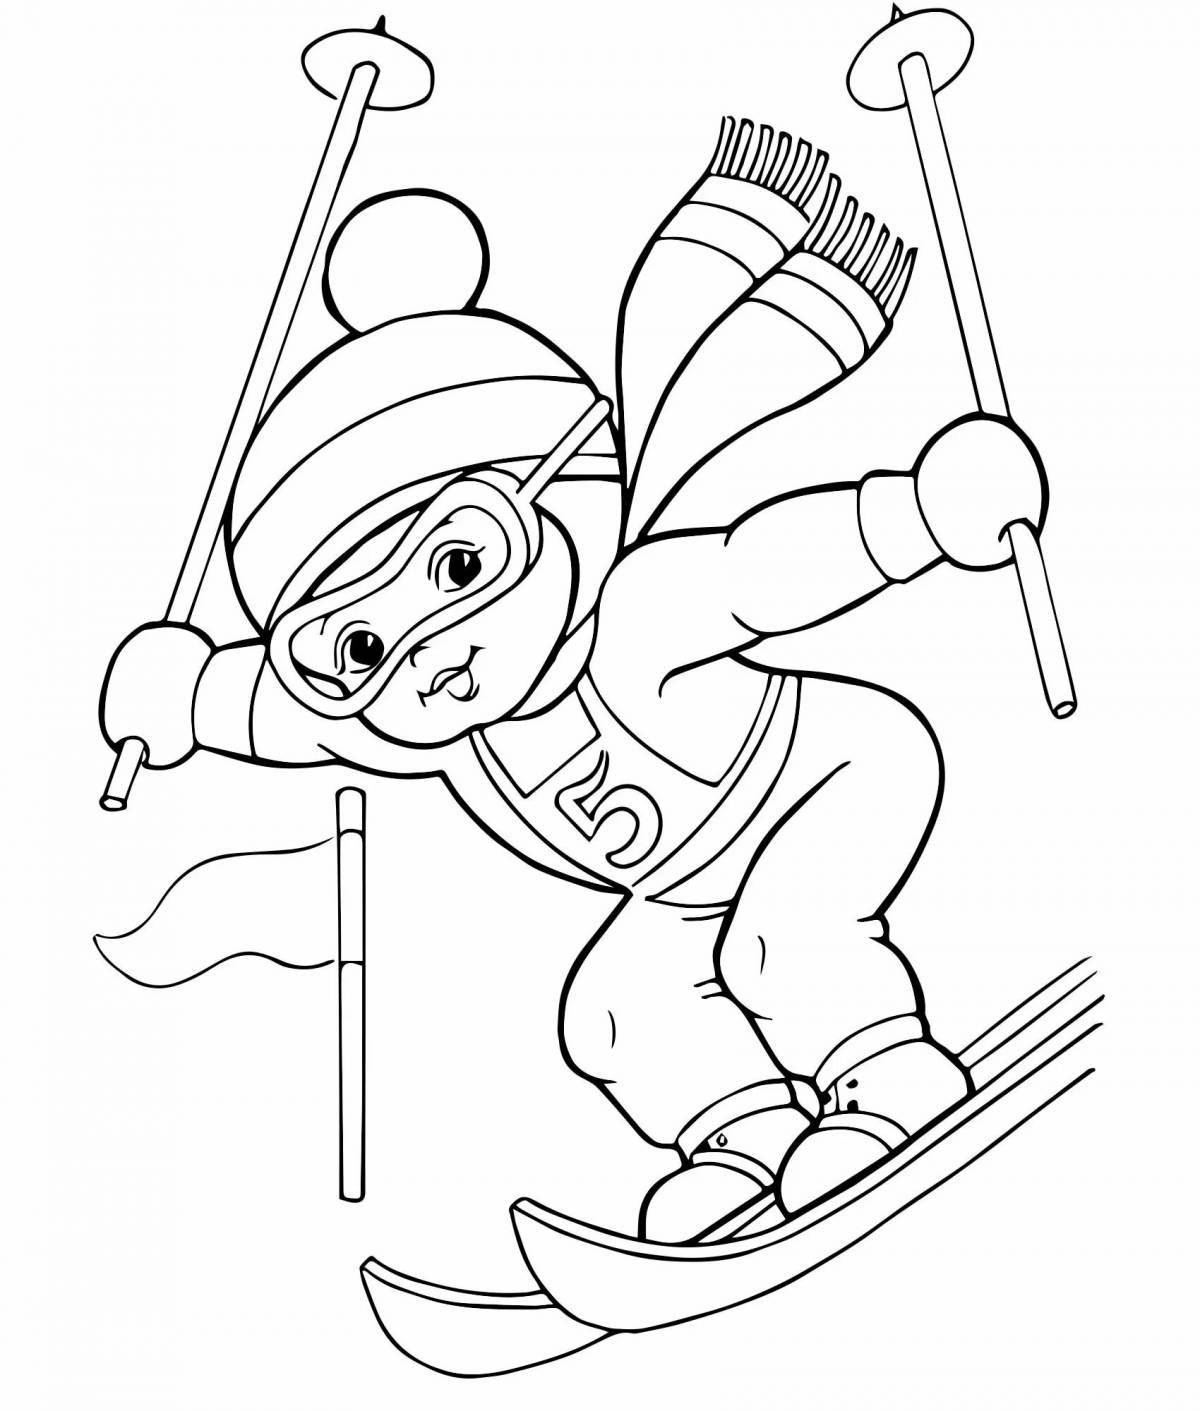 Colorful sports coloring pages for 5-6 year olds